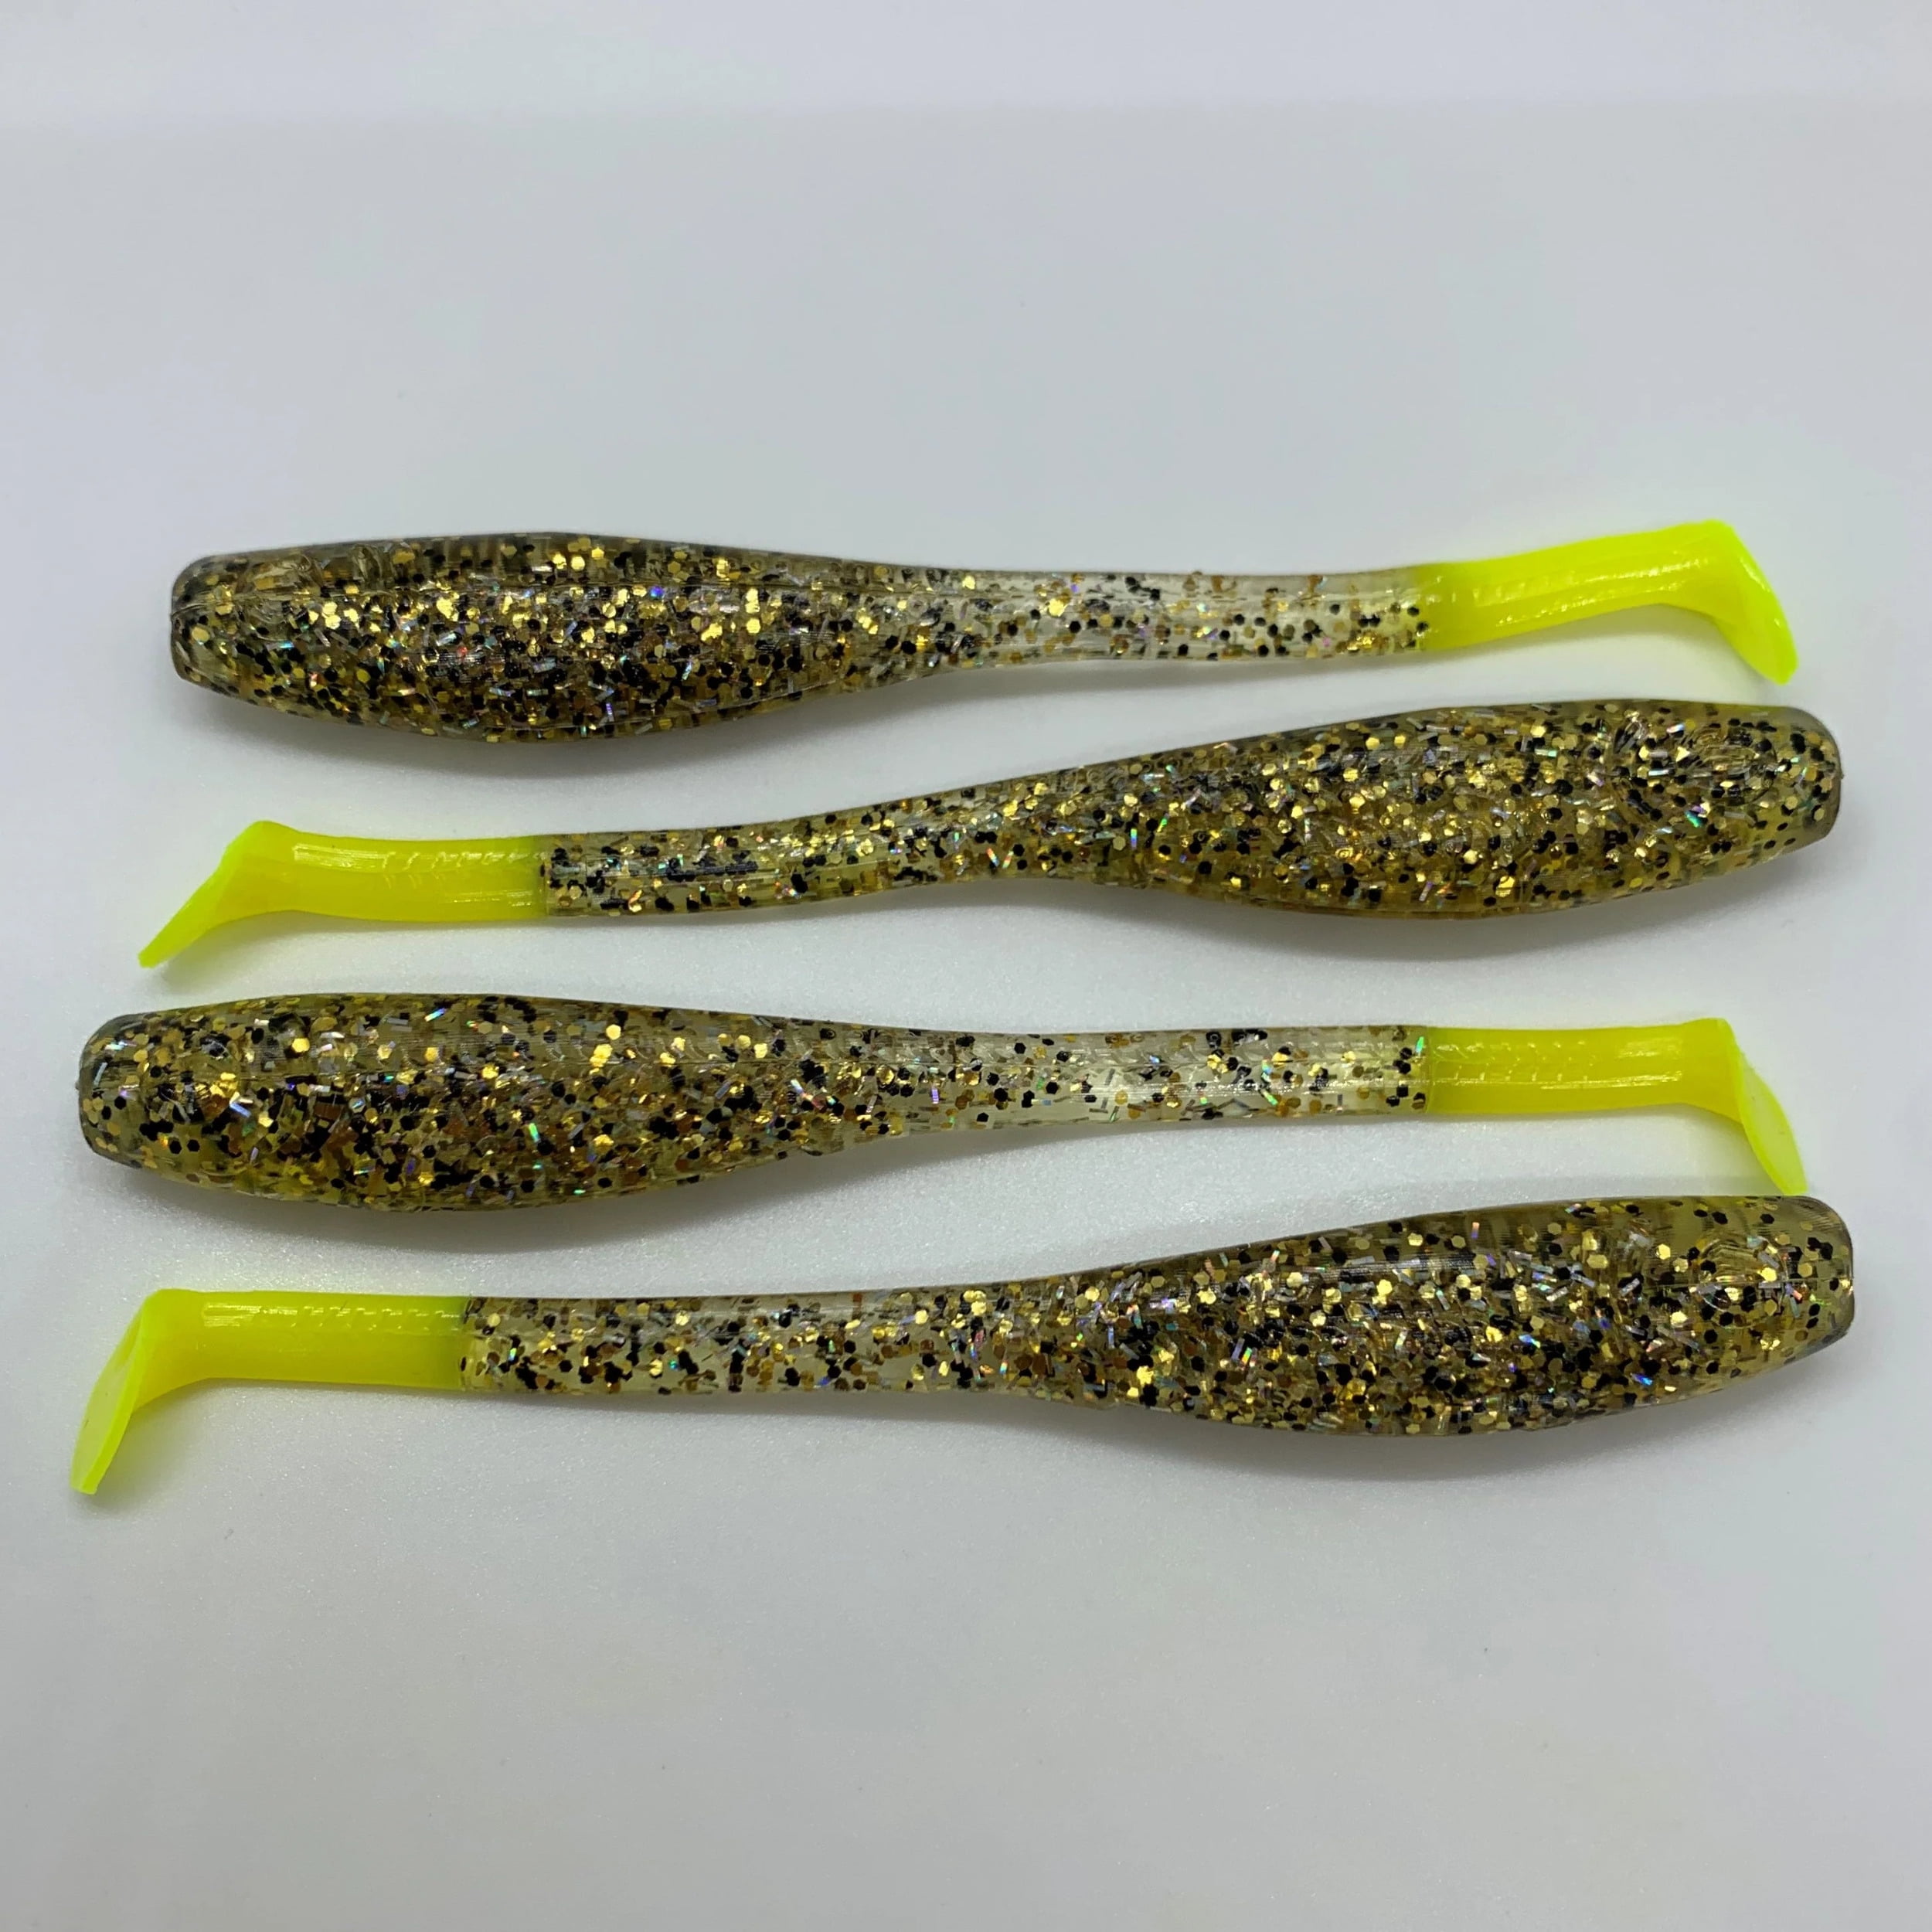 Down South Lures Super Model 5 Paddle Tail Swimbaits 6-Pack (Made in USA) 